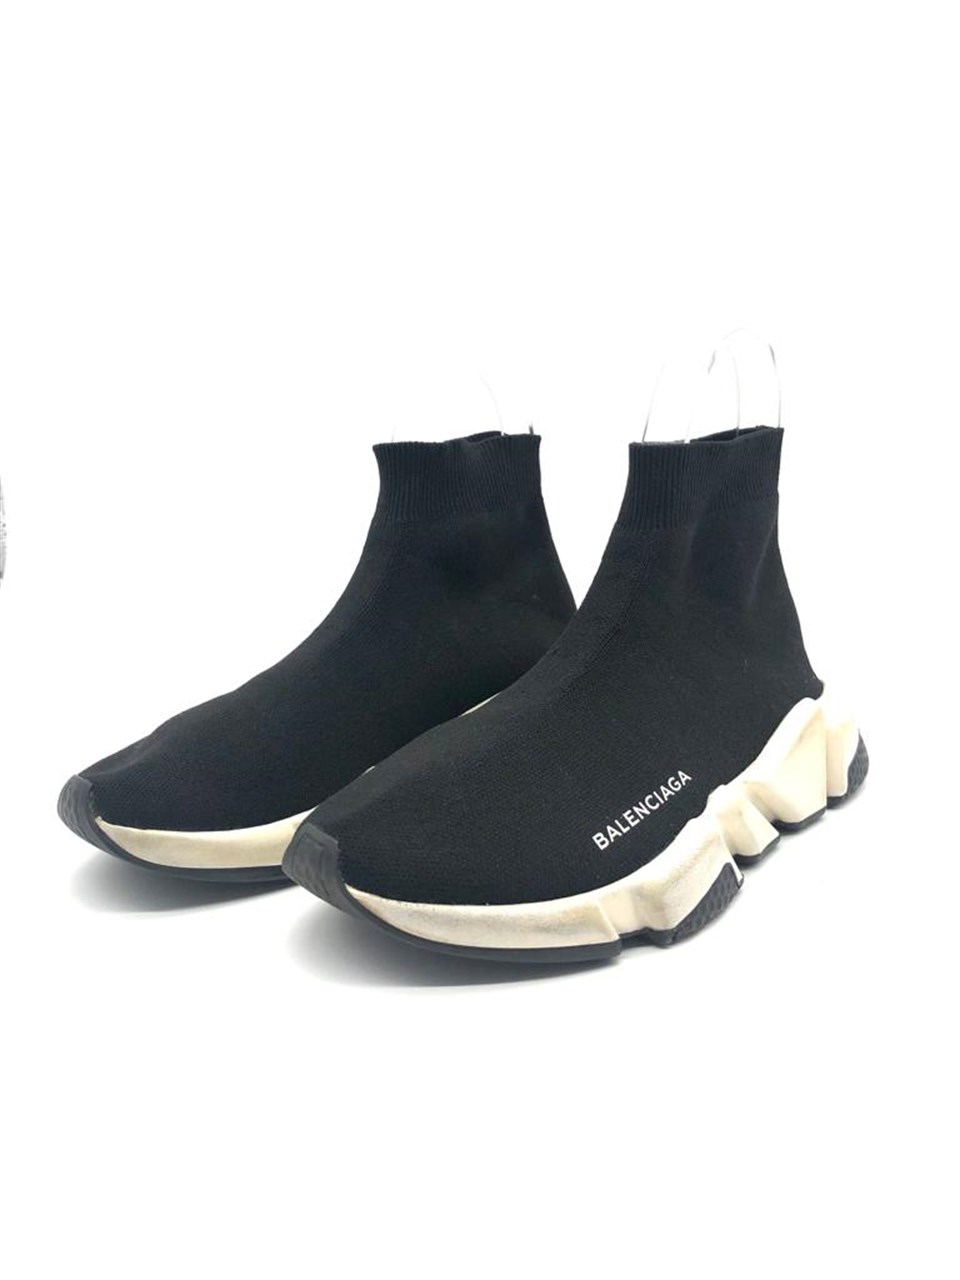 Buy Balenciaga Shoes And Sneakers StockX